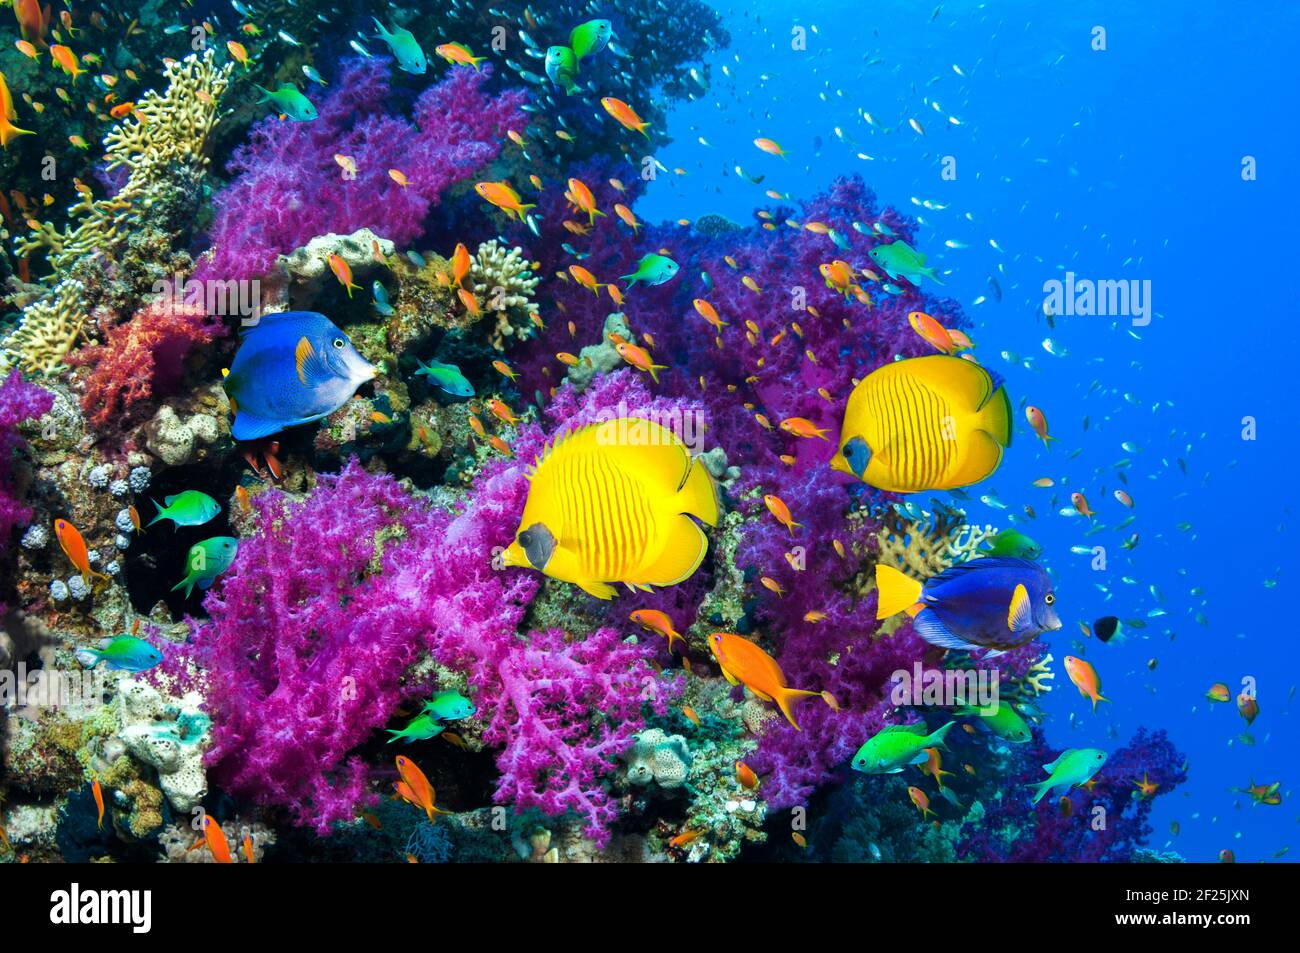 Golden butterflyfish and Yellowtail tang or surgeonfish [Zebrasoma xanthurum] swimming over soft corals.  Egypt, Red Sea. Stock Photo